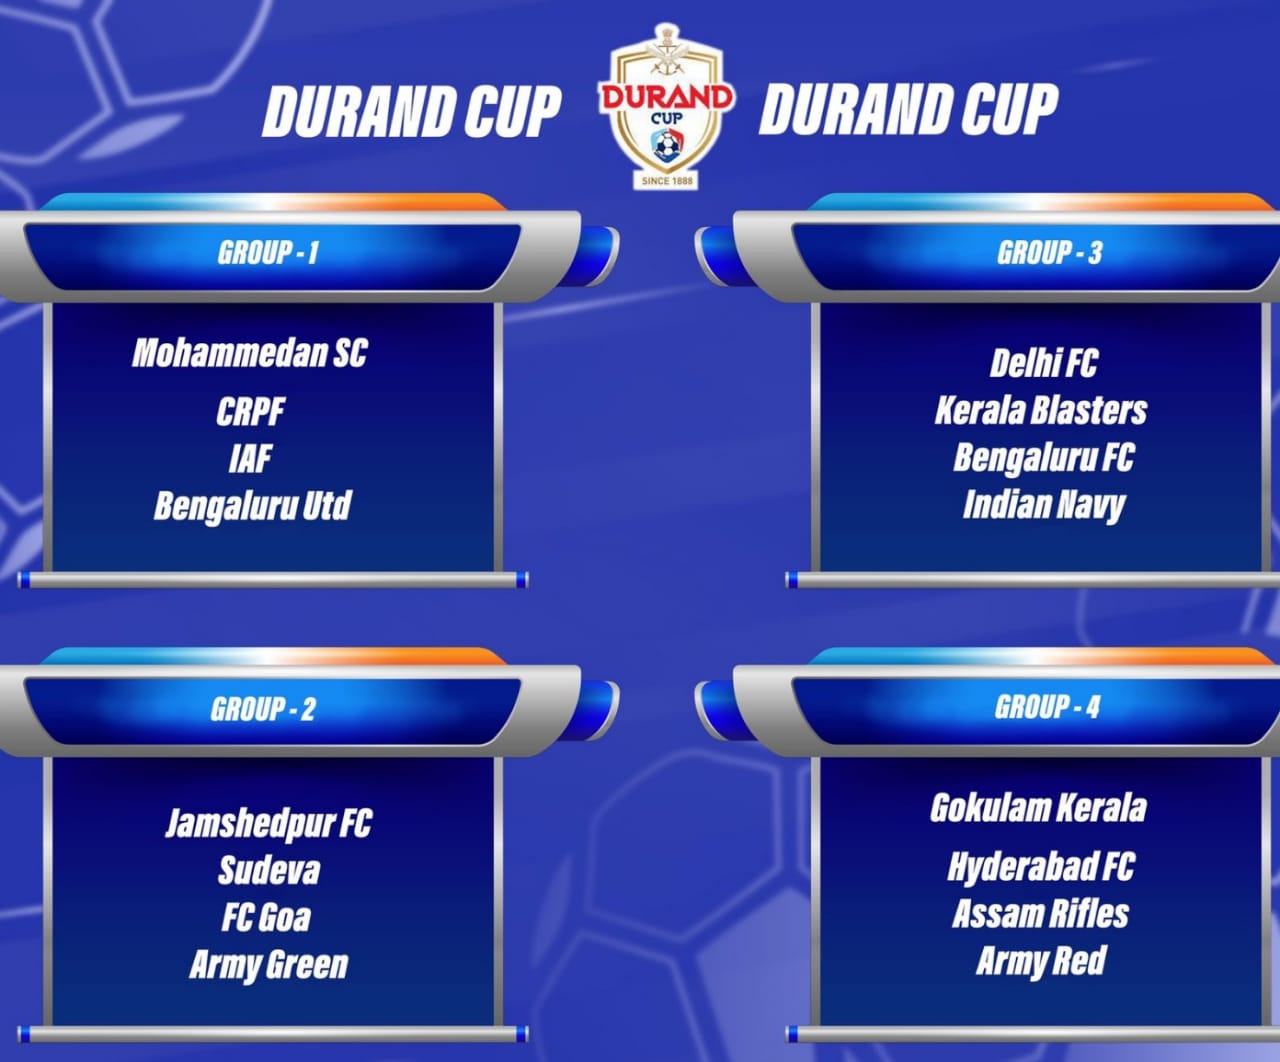 Durand Cup 2021 schedule unveiled